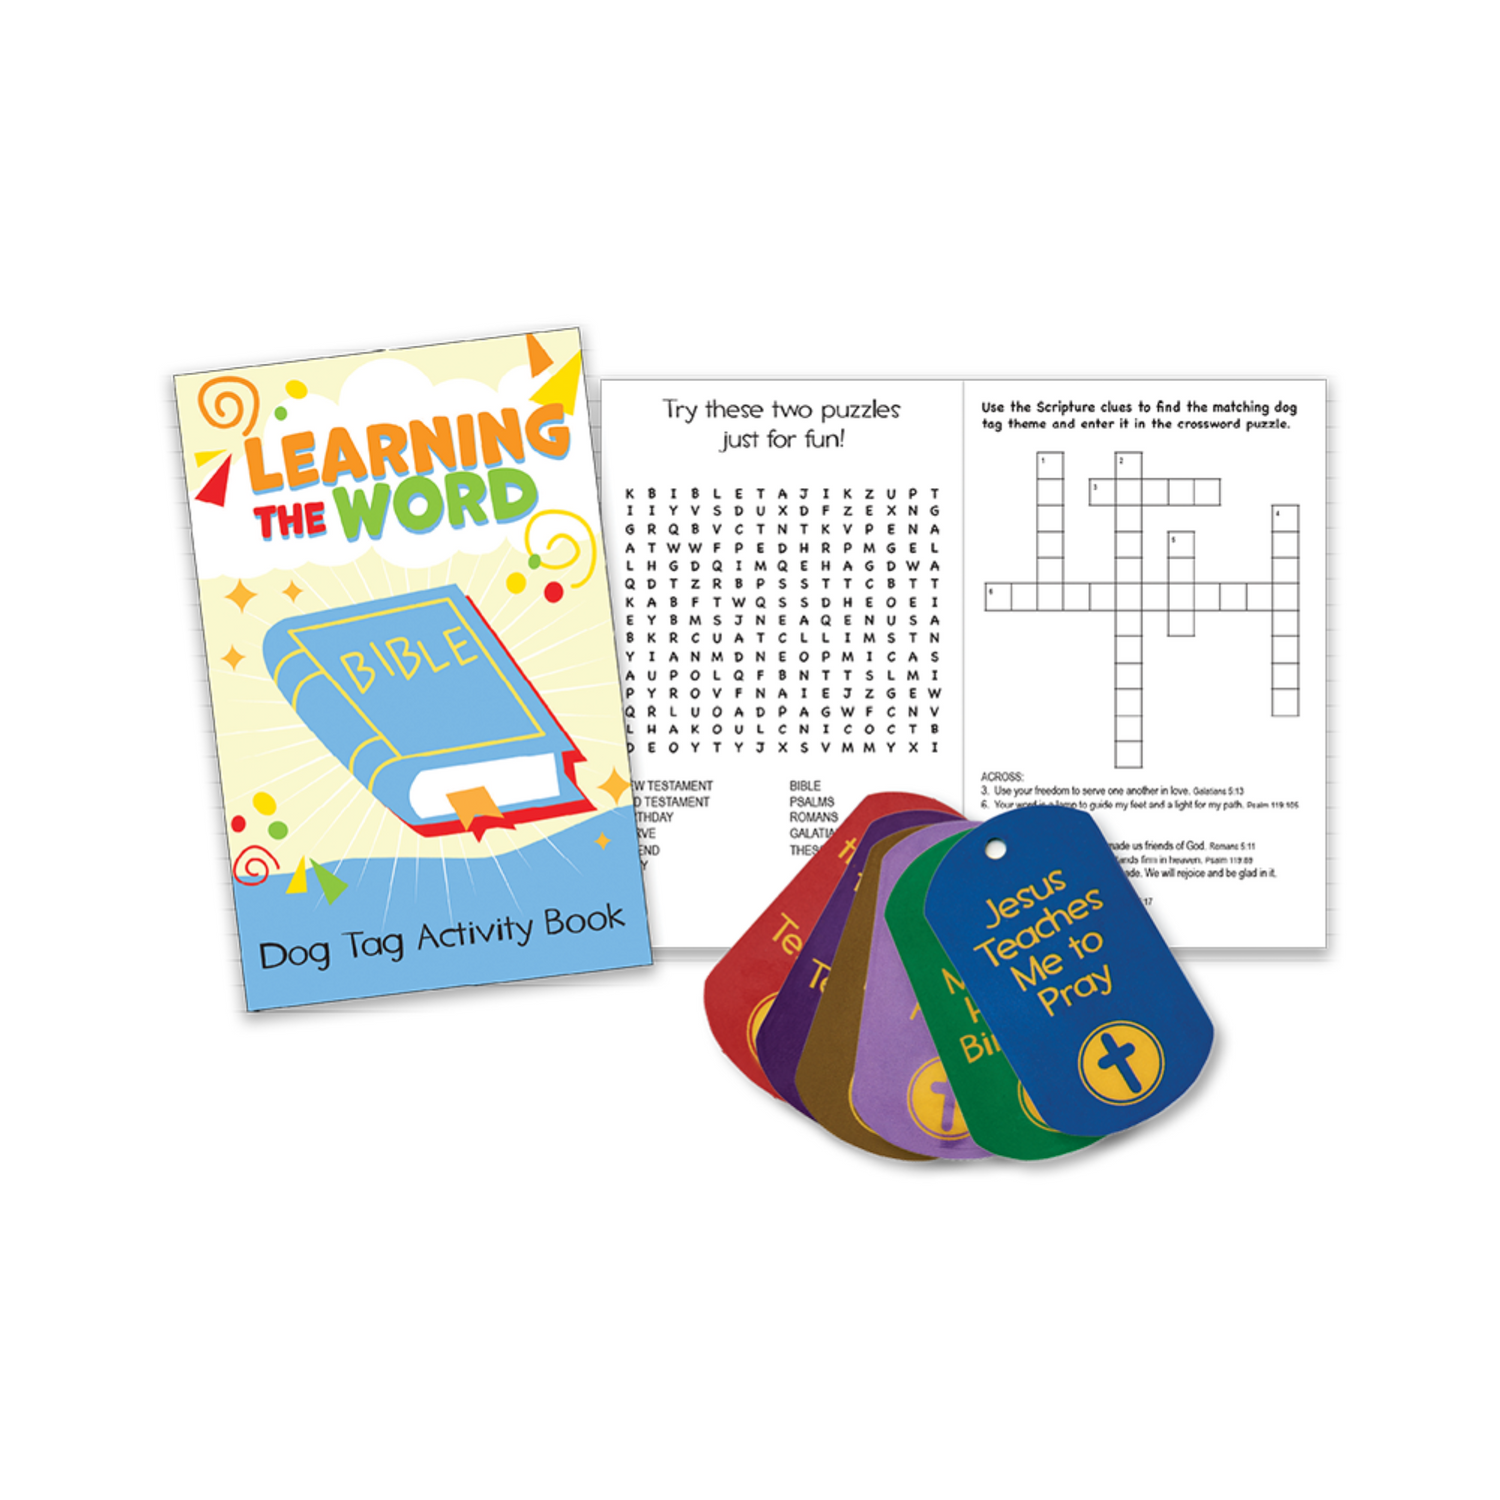 Learning the Word 6 Activity Books & Dog Tags for Christian Children's Ministry